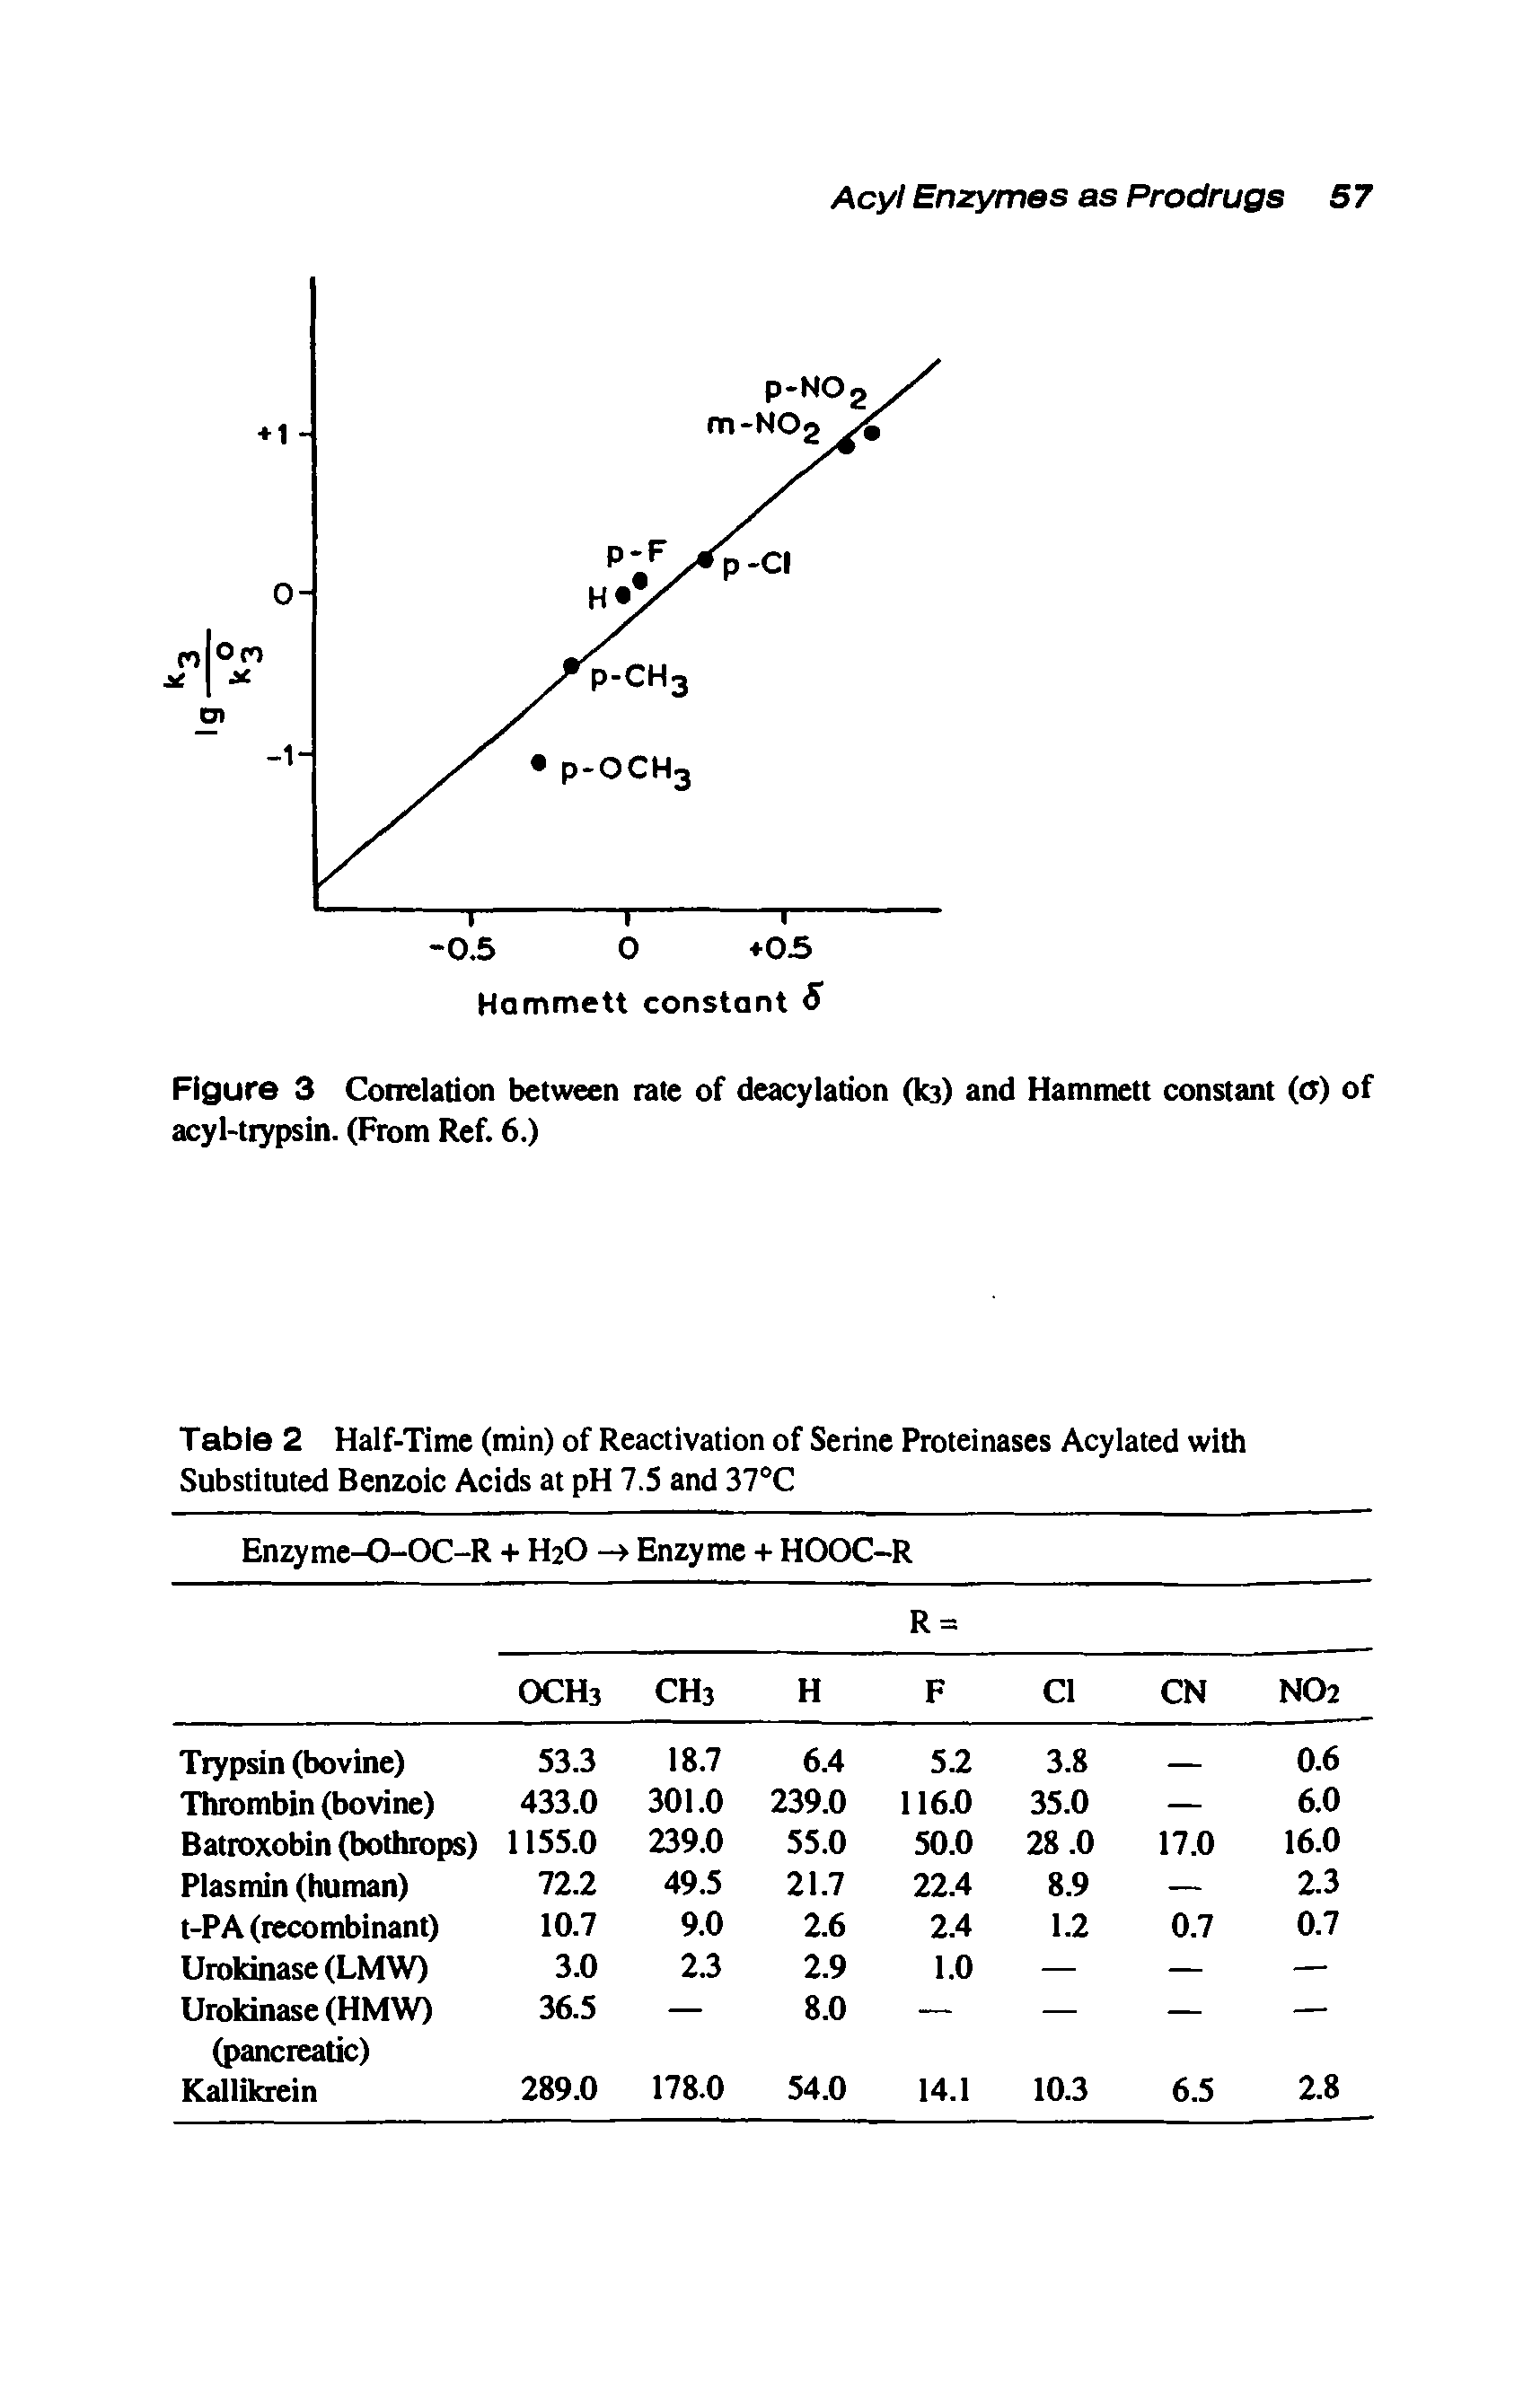 Figure 3 Correlation between rate of deacylation (to) and Hammett constant (O) of acyl-trypsin. (From Ref. 6.)...